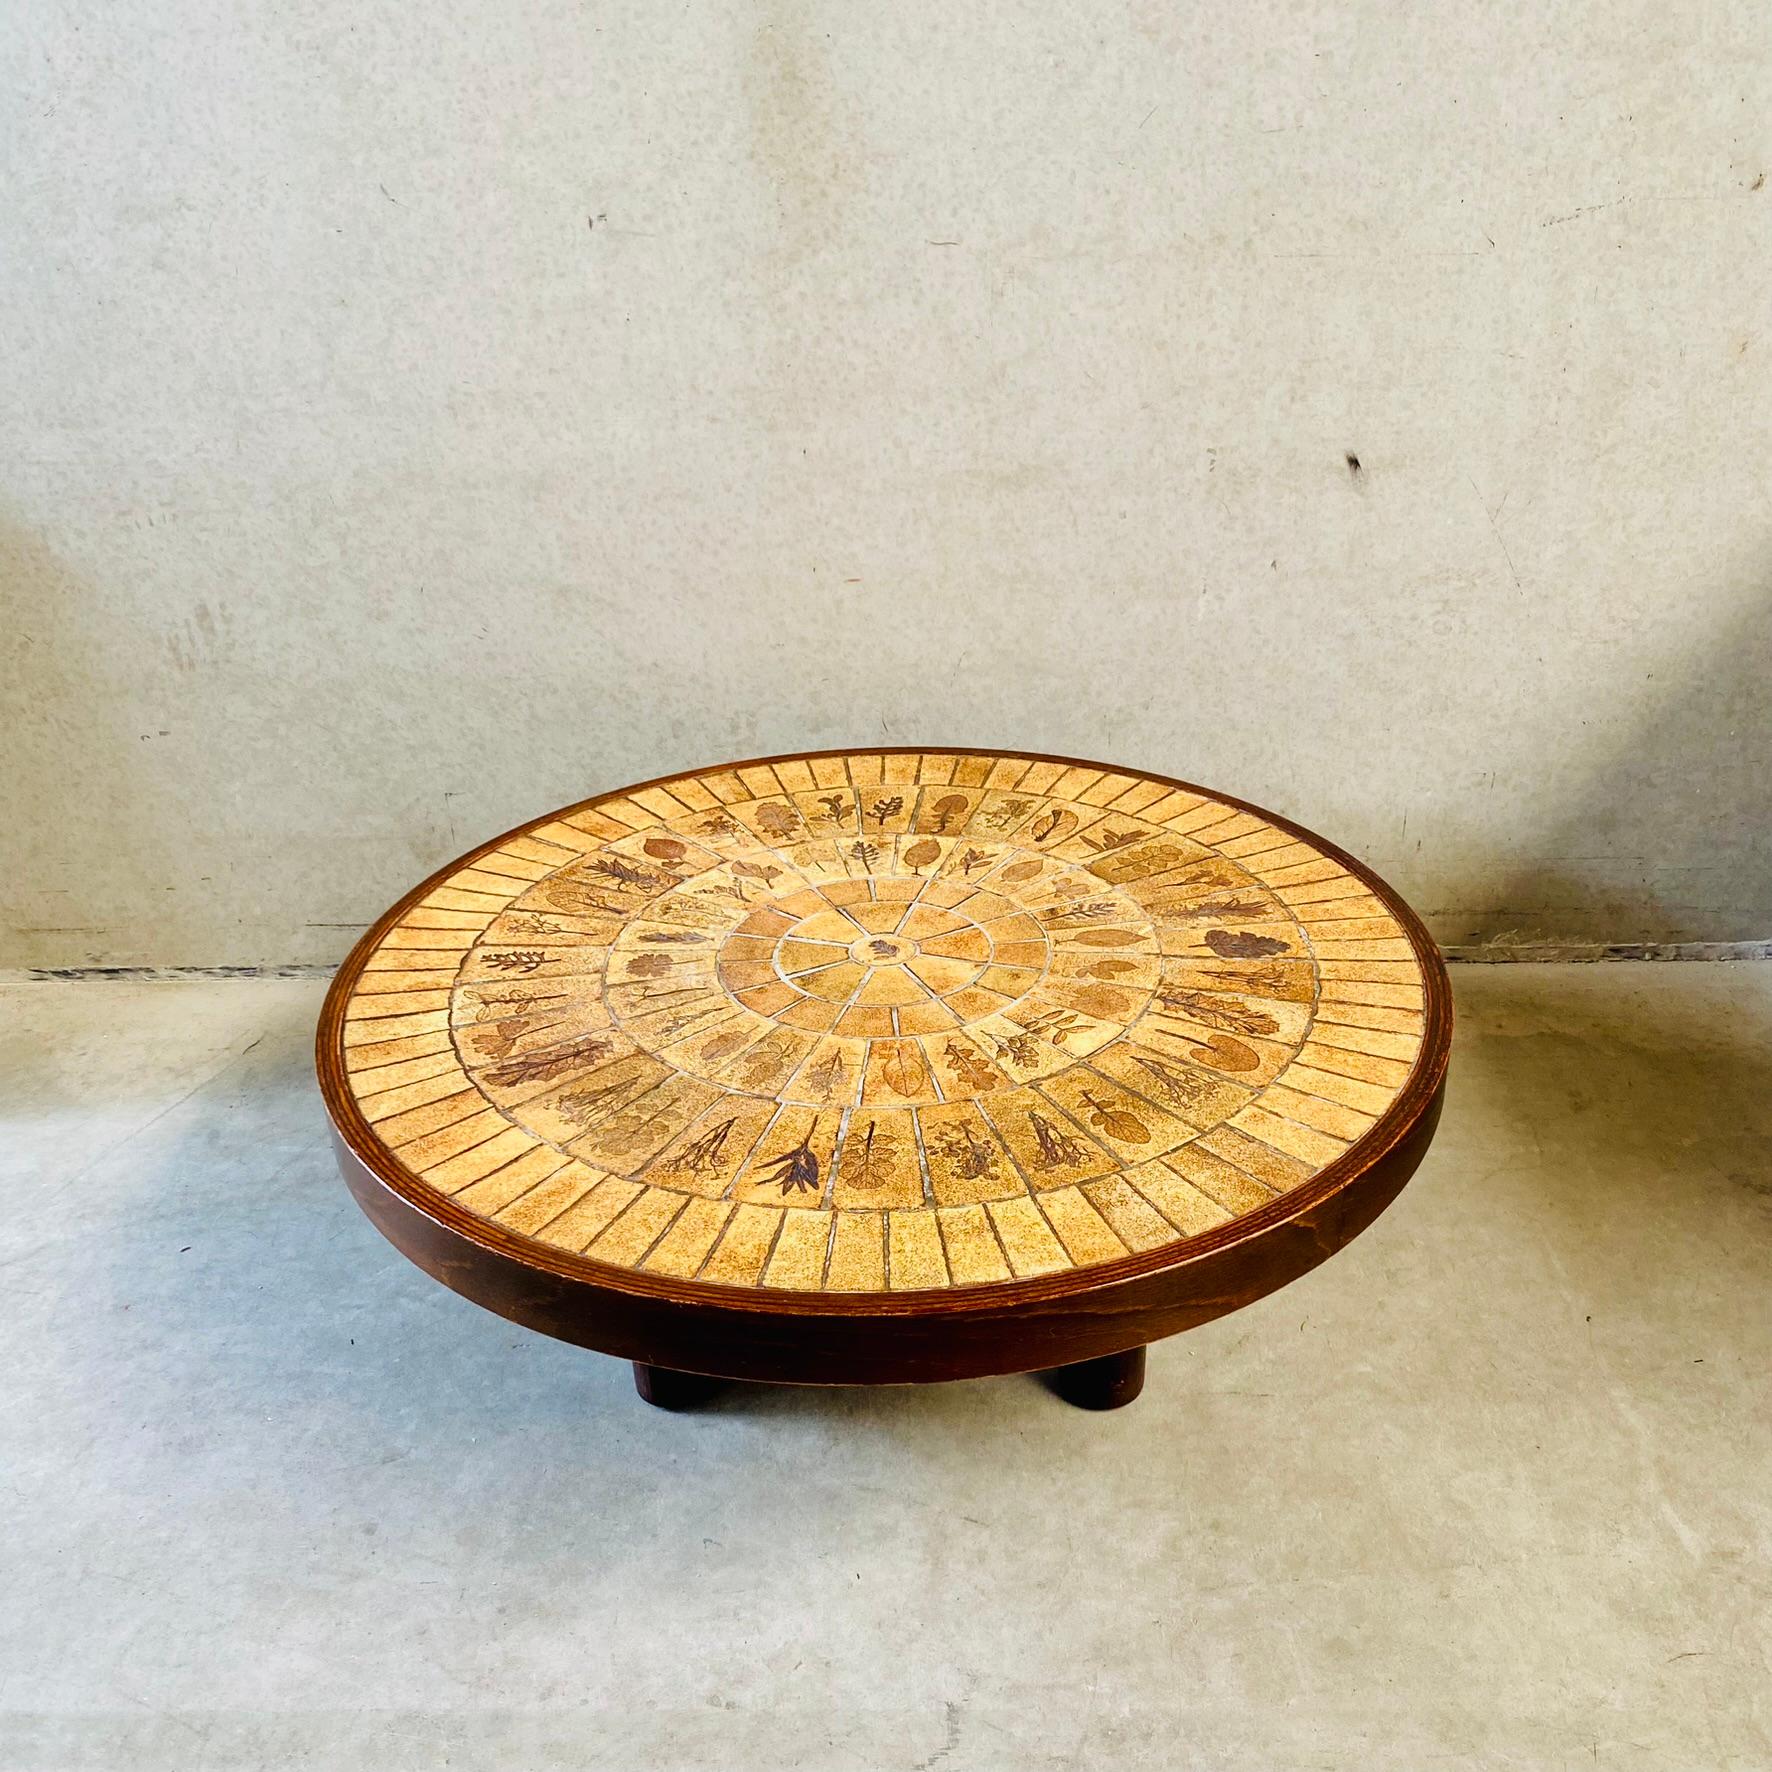 Round Brutalist Ceramic Coffee Table by Roger Capron, France 1960 For Sale 8